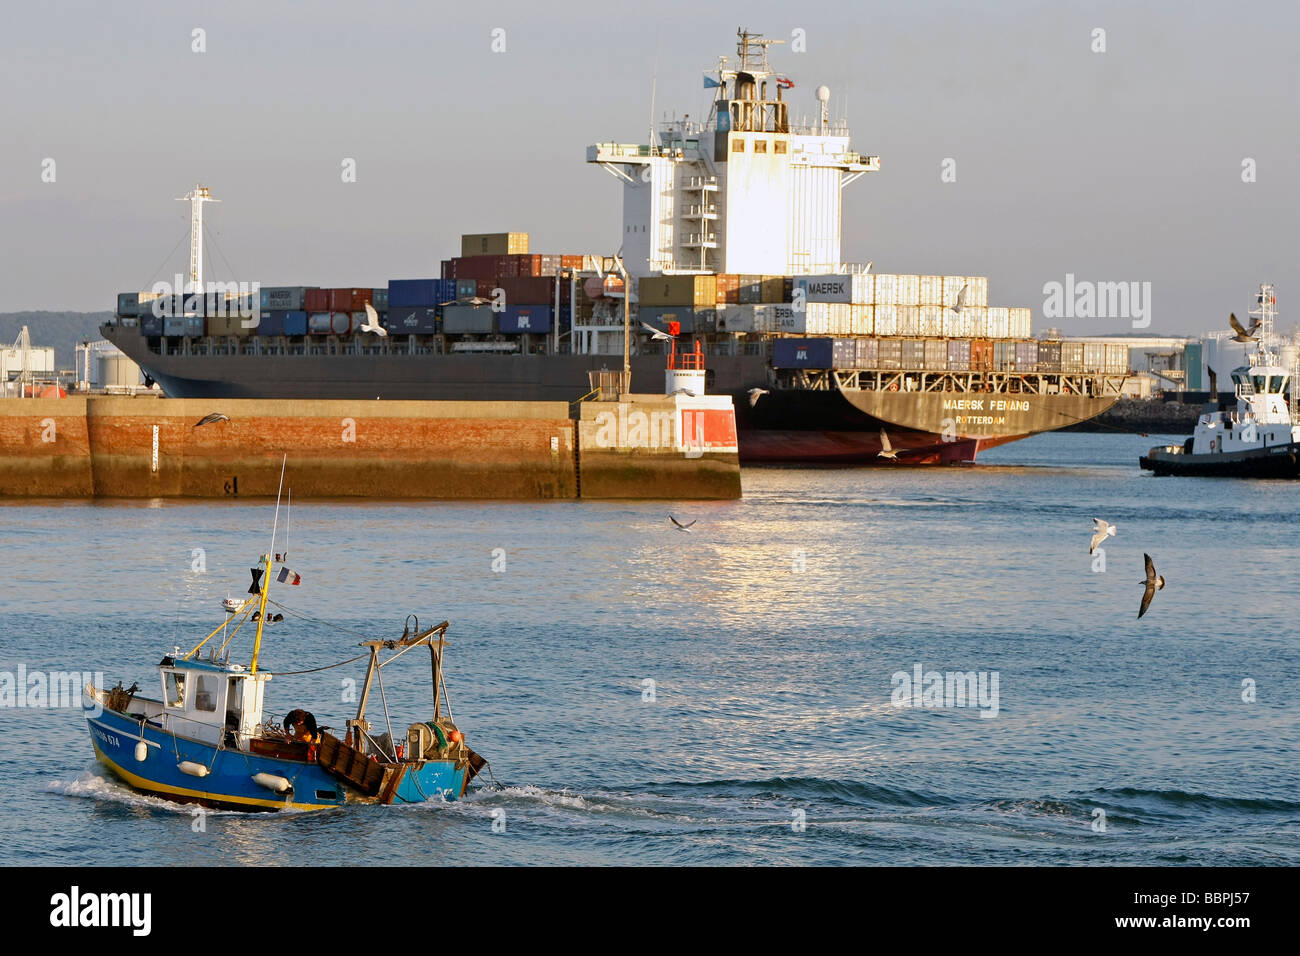 TRAWLER ENTERING THE PORT IN FRONT OF A CONTAINER SHIP, COMMERCIAL PORT, LE HAVRE, SEINE-MARITIME (76), NORMANDY, FRANCE Stock Photo